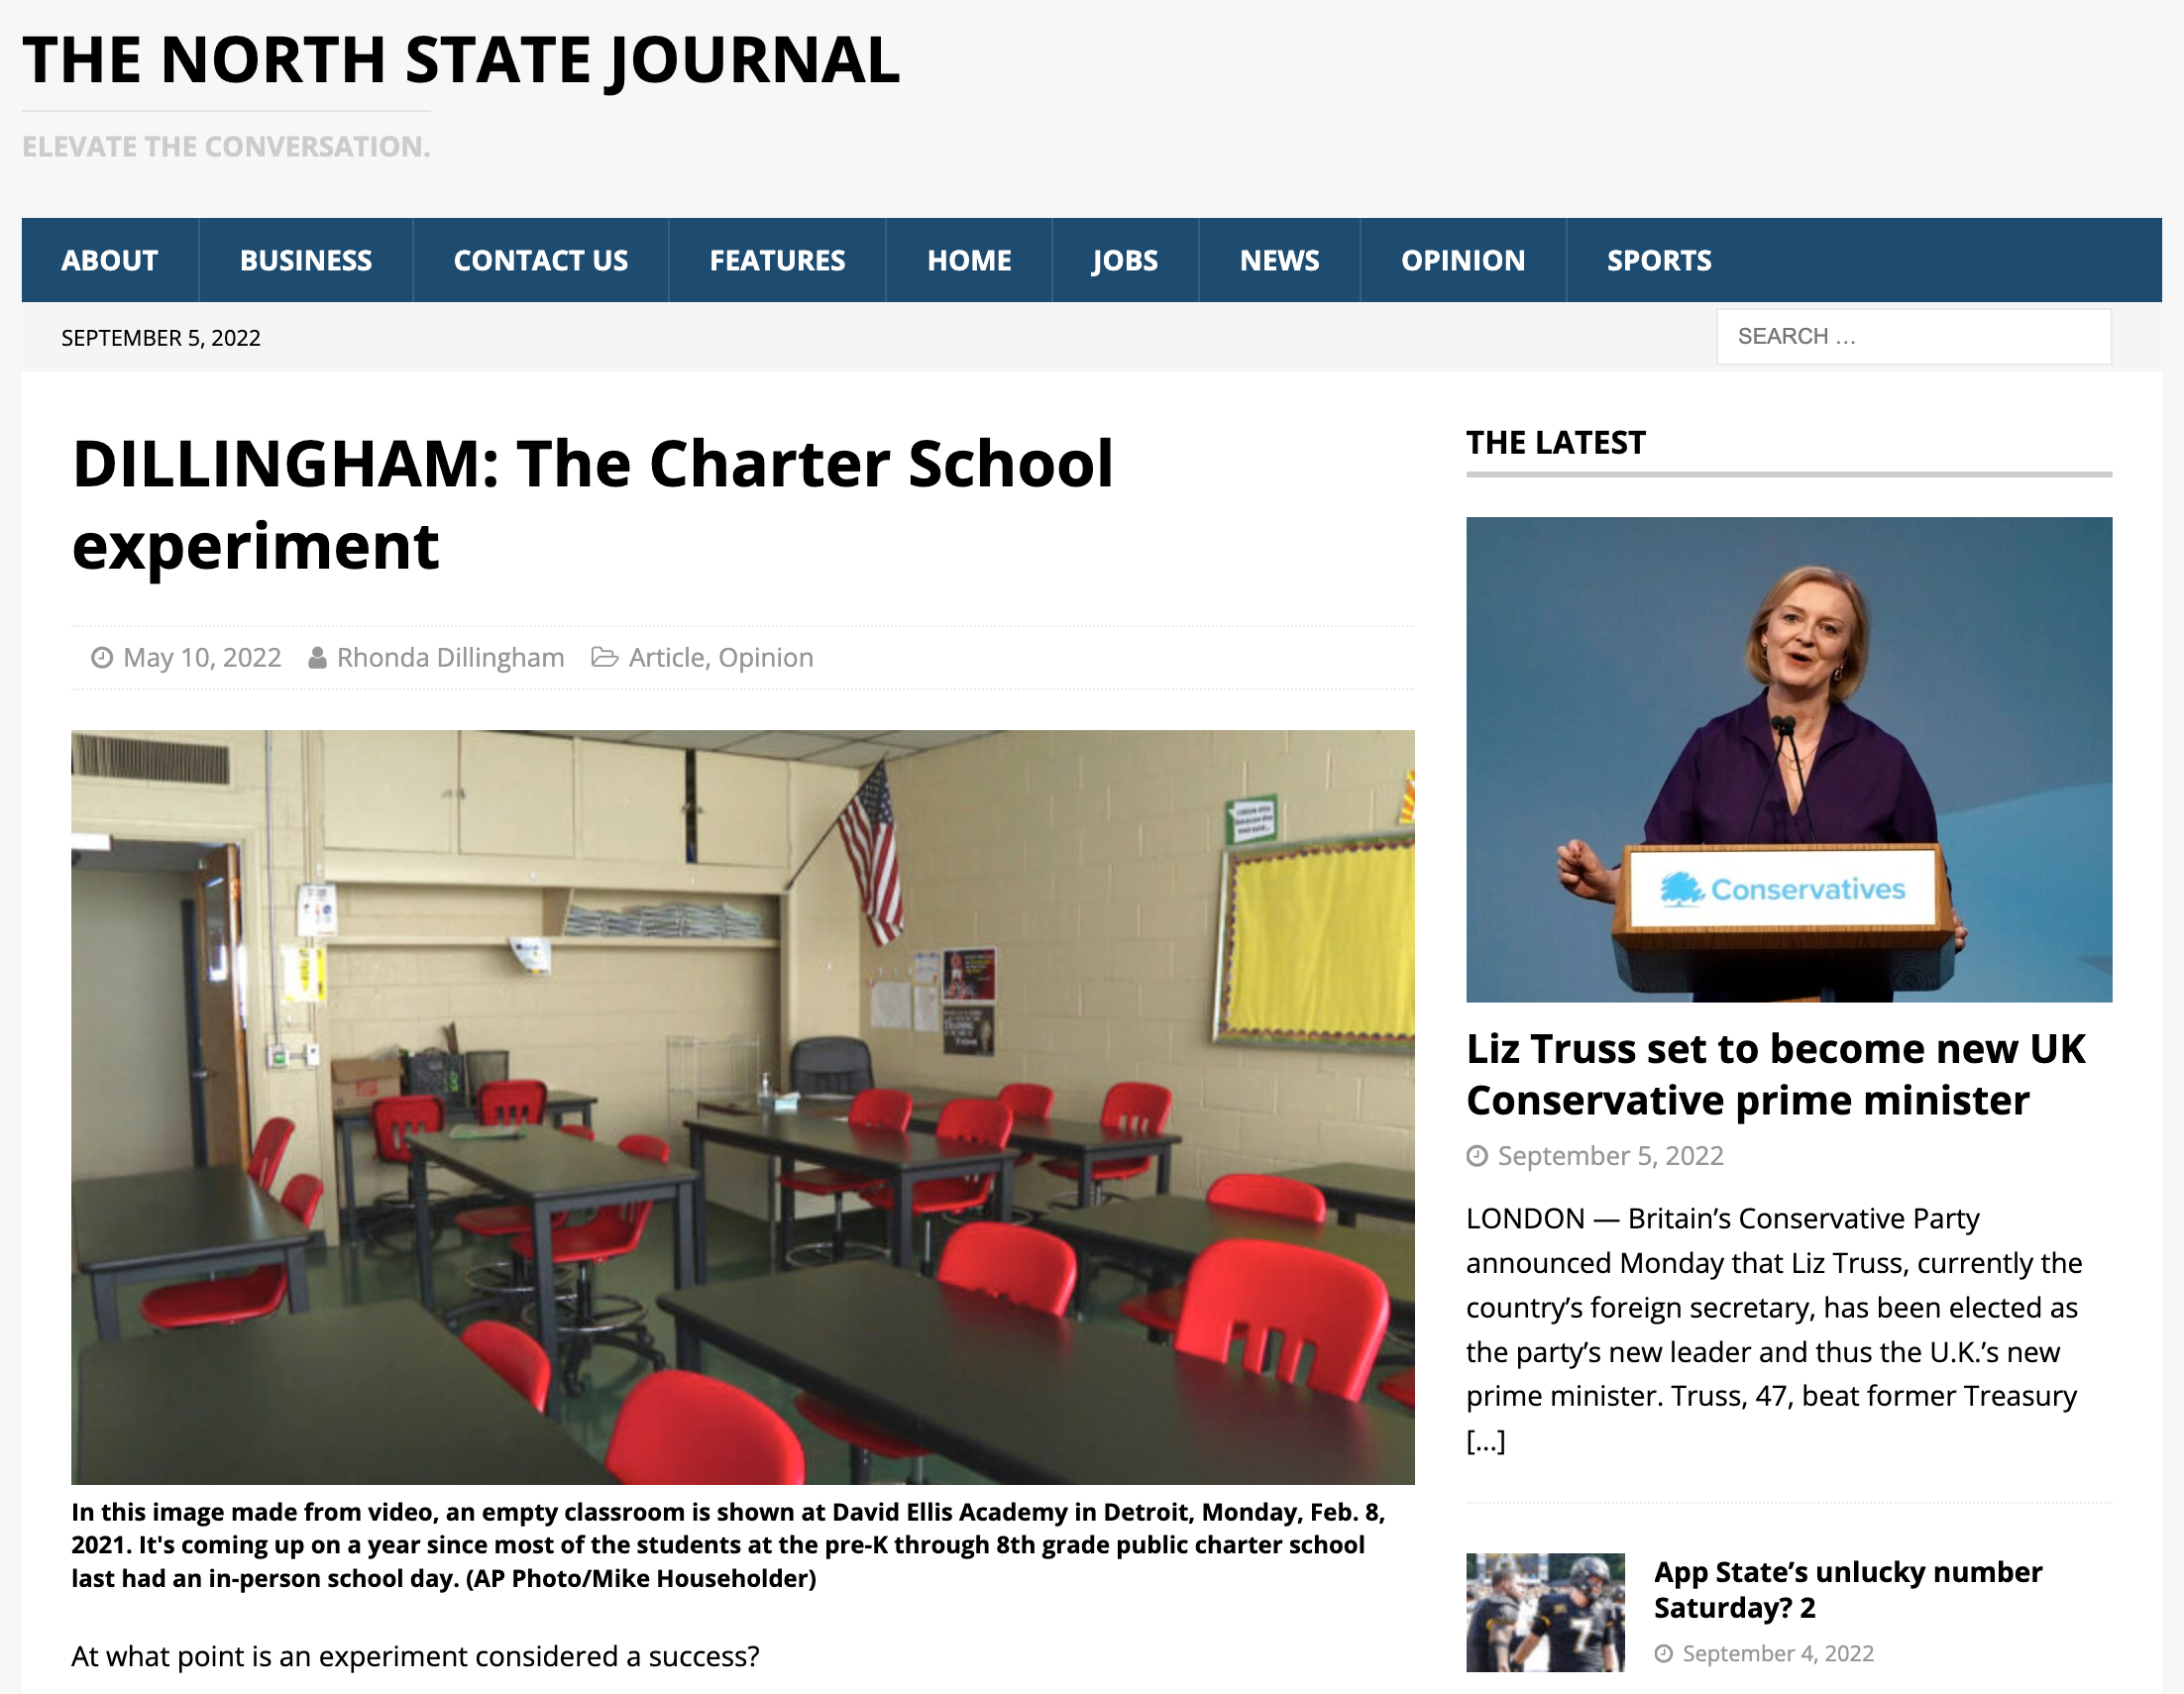 Screenshot of an article from the North State Journal "The Charter Experiment" by Rhonda Dillingham.